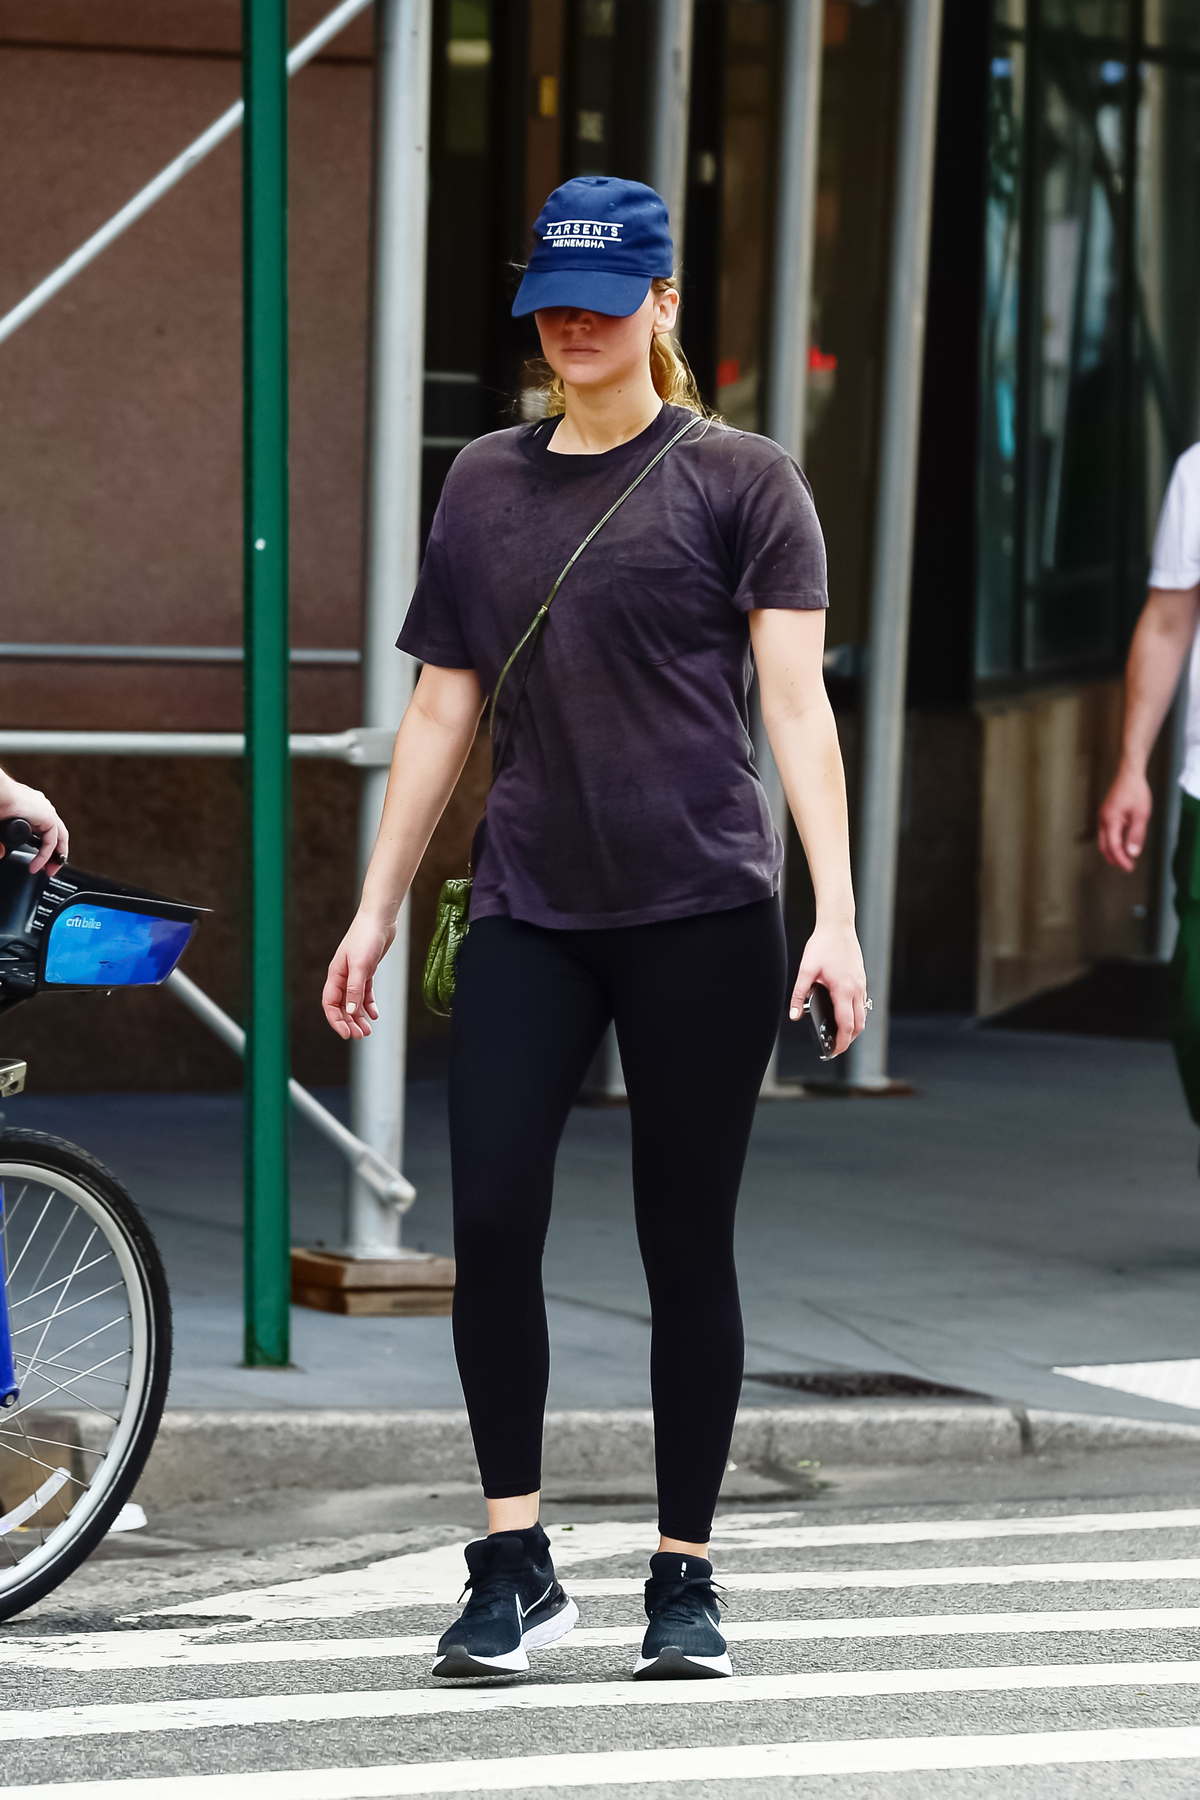 Jennifer Lawrence opts for casual t-shirt and leggings while out